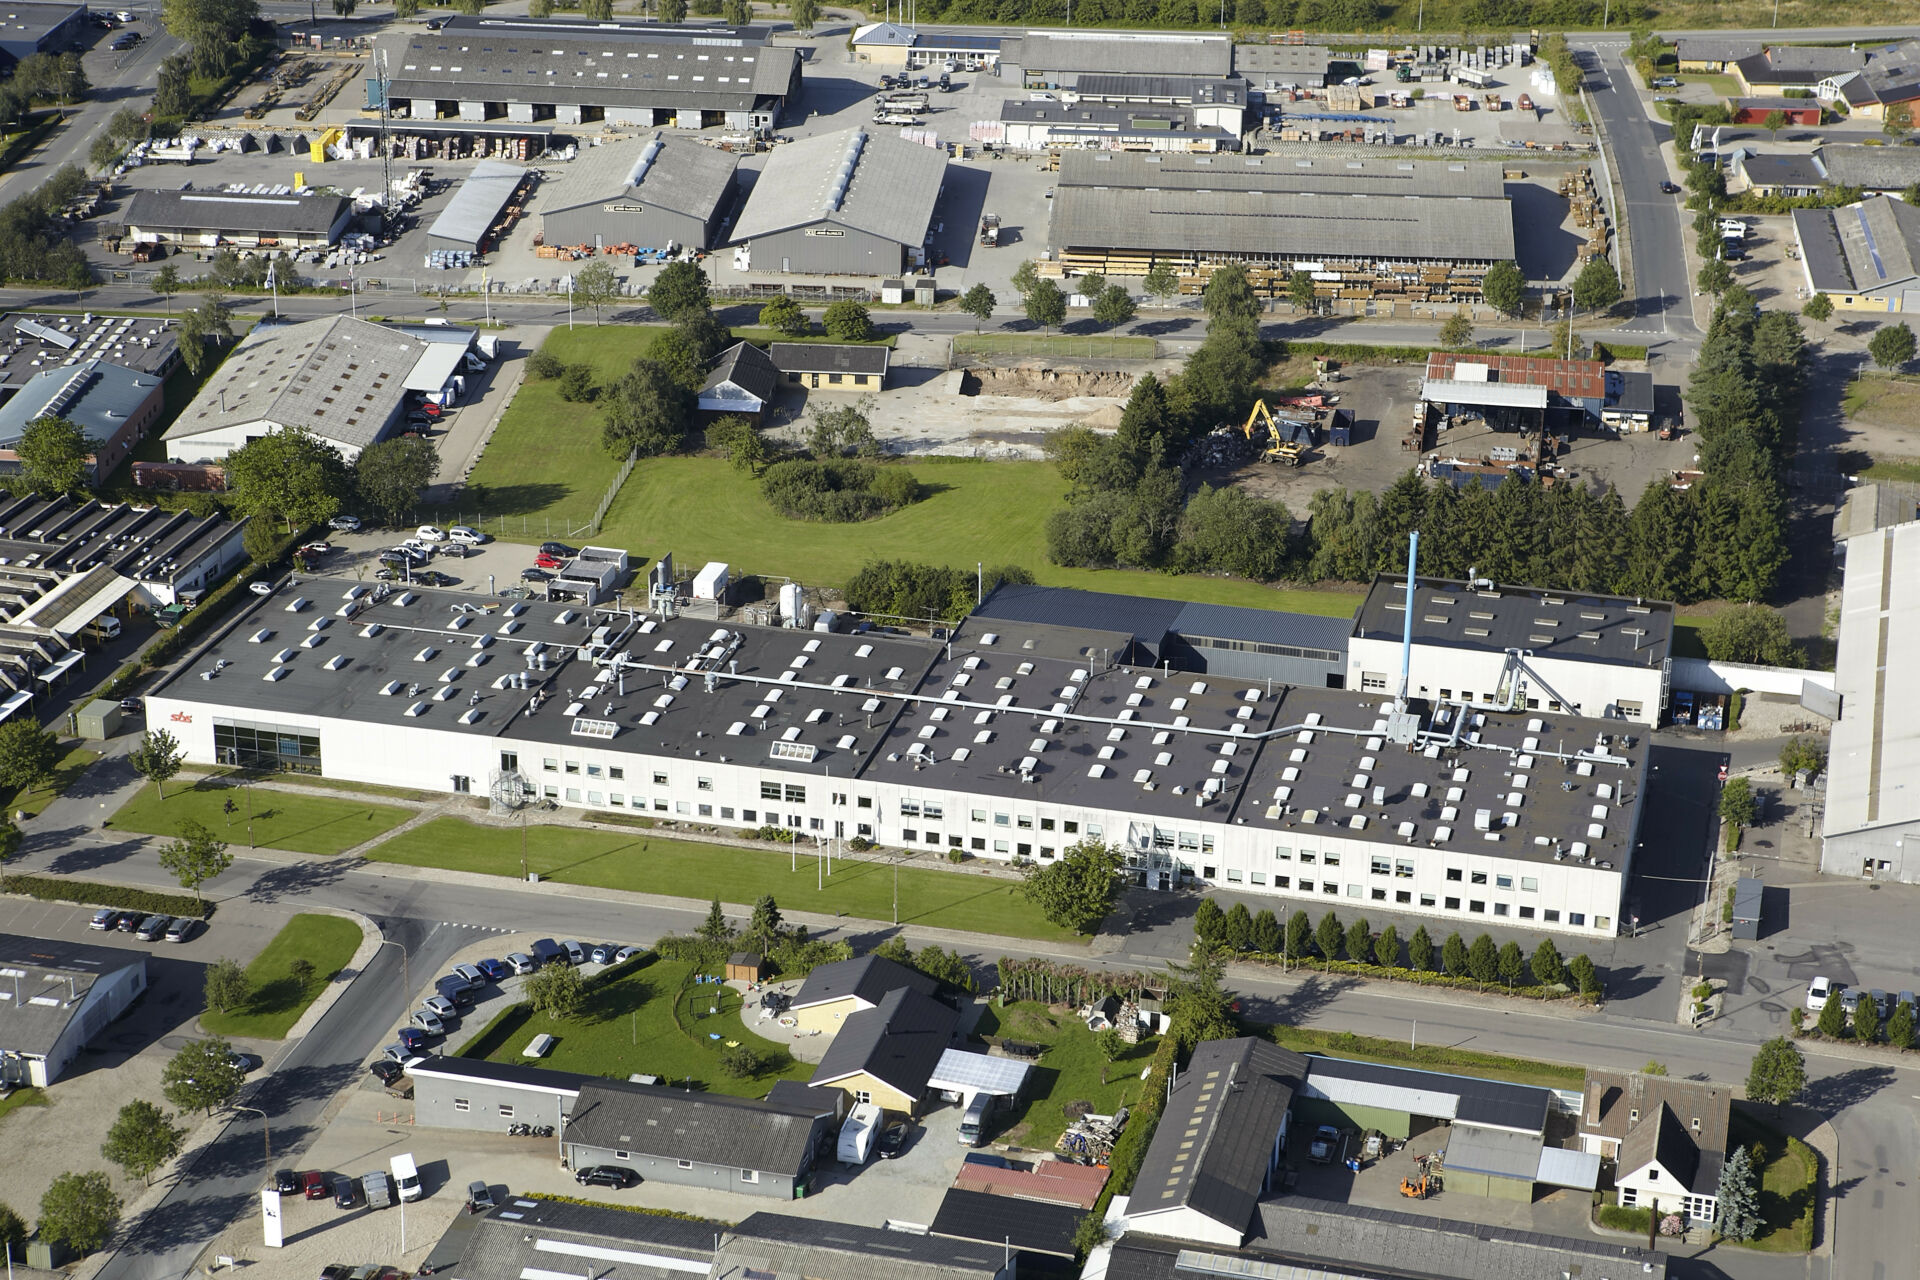 The SBS Friction manufacturing facility in Svendborg, Denmark. Photo courtesy SBS Friction.